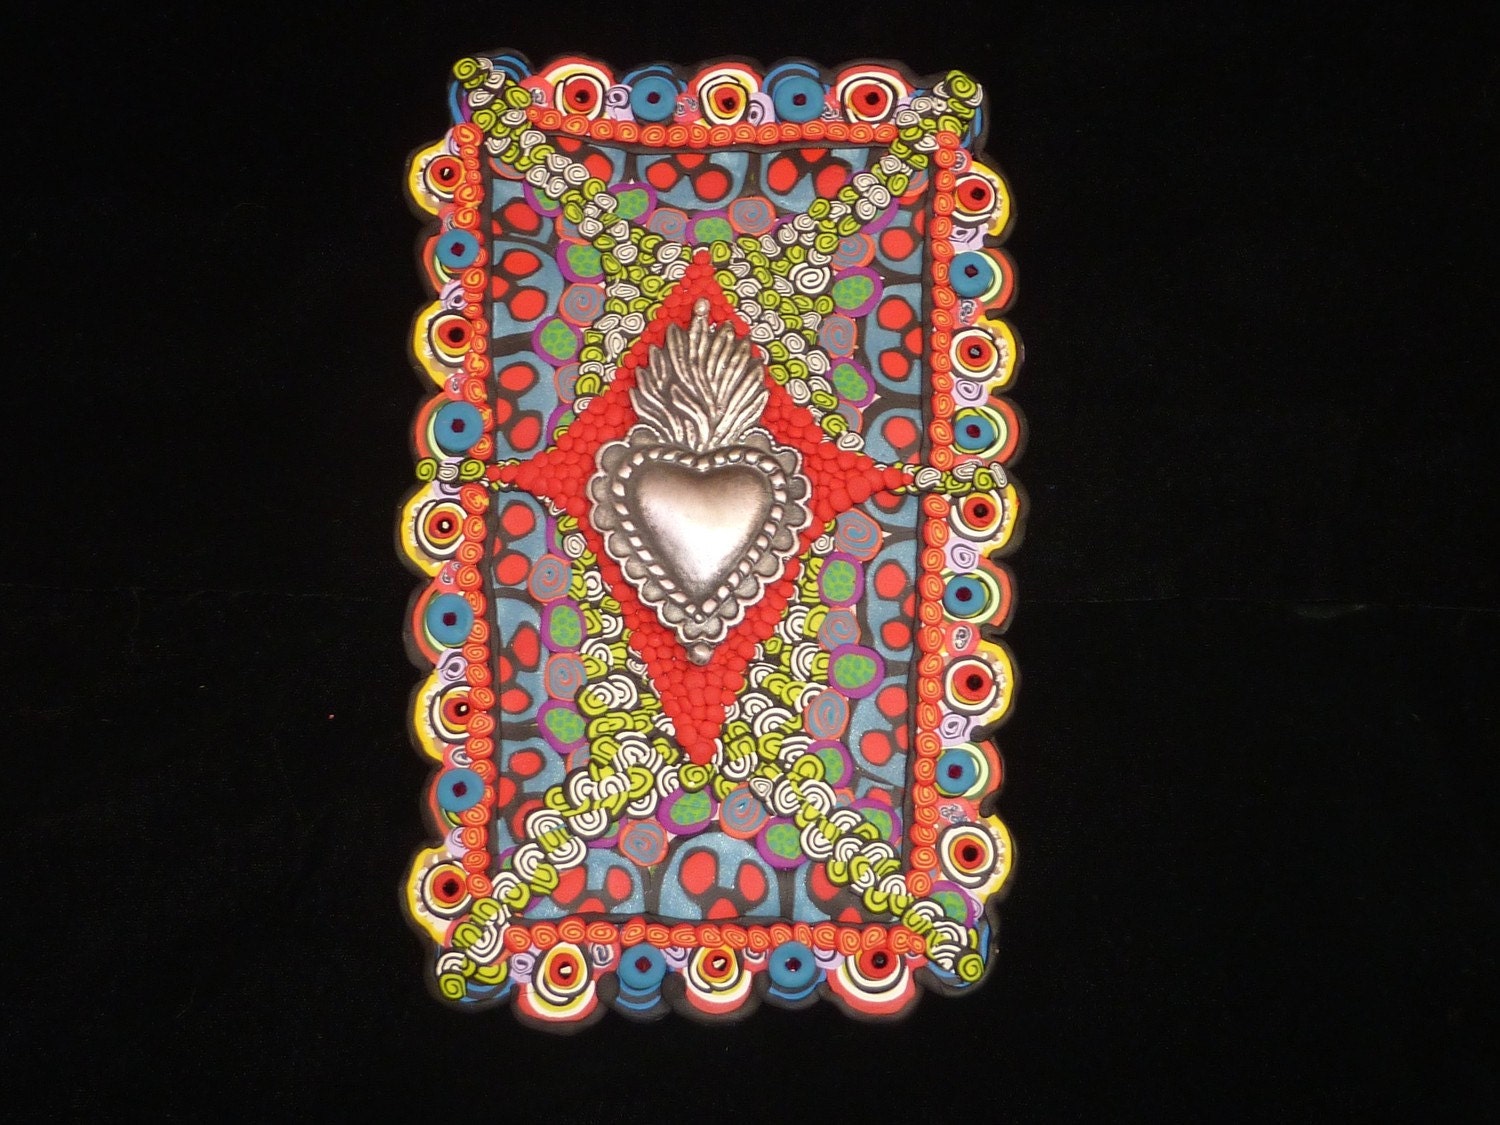 Mexicolor Clay Mosaic Wall Hanging with Sacred Heart Milagro